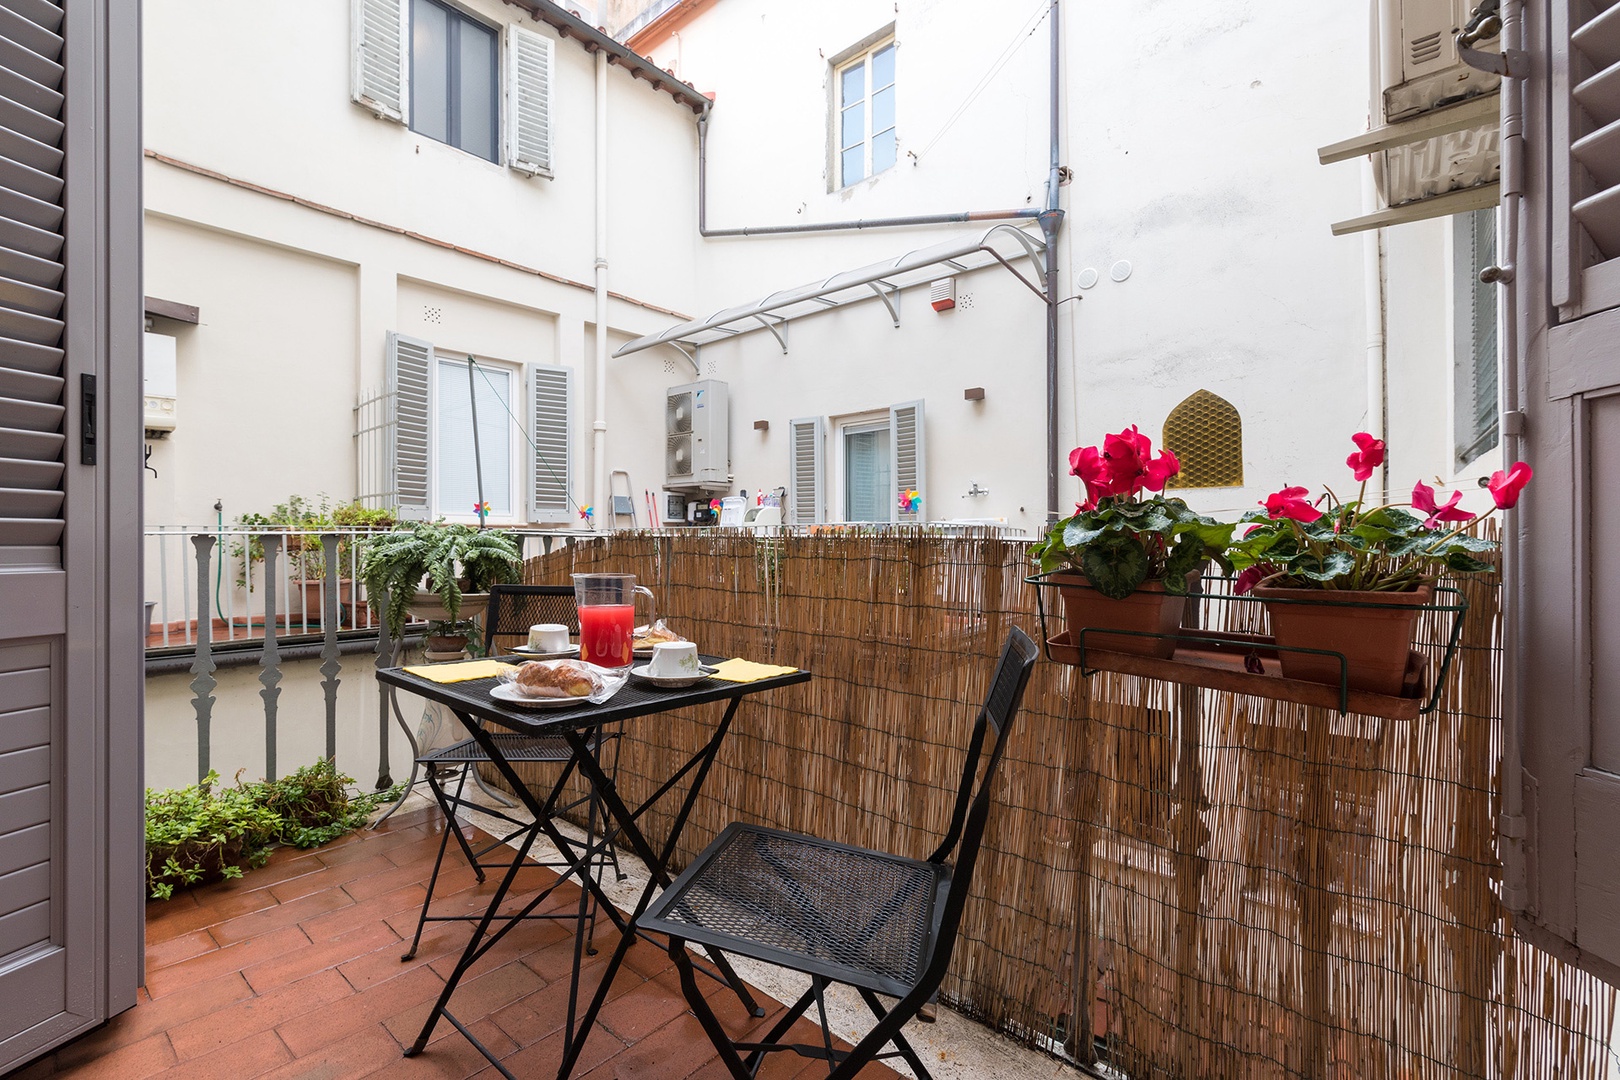 The small terrace provides a sunny retreat. It faces the back of the neighboring apartments.